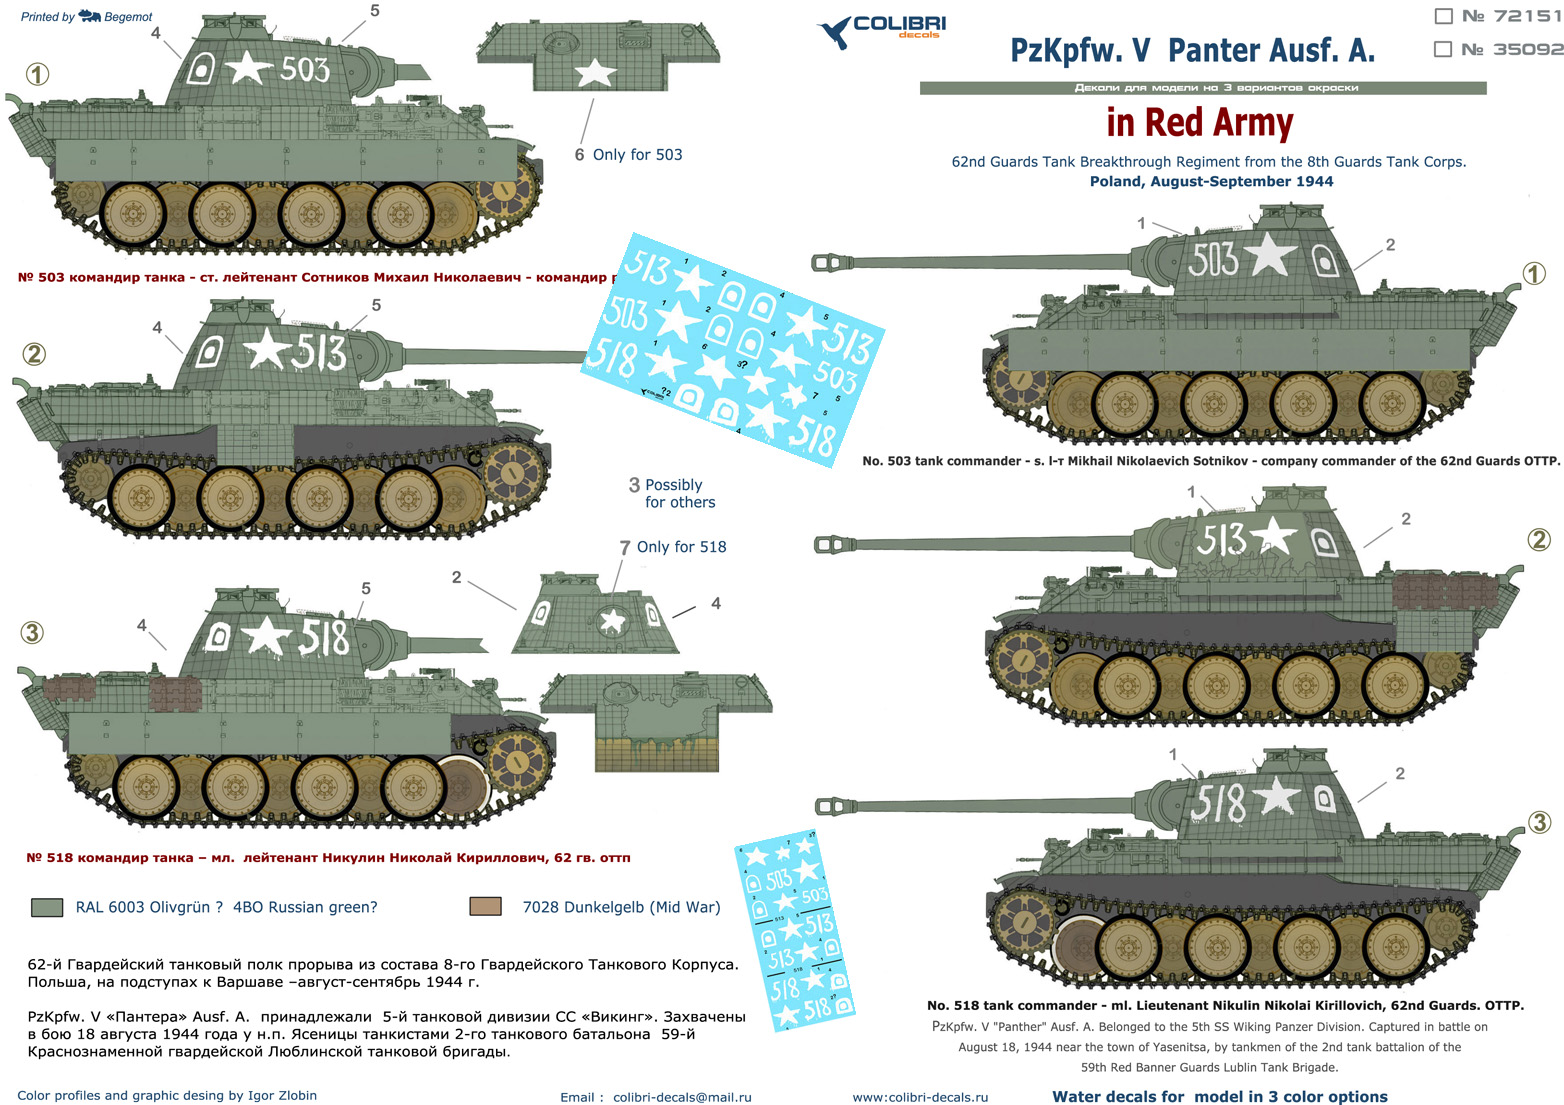 Decal 1/35 Pz.Kpfw.V Panter Ausf. A in Red Army (Colibri Decals)